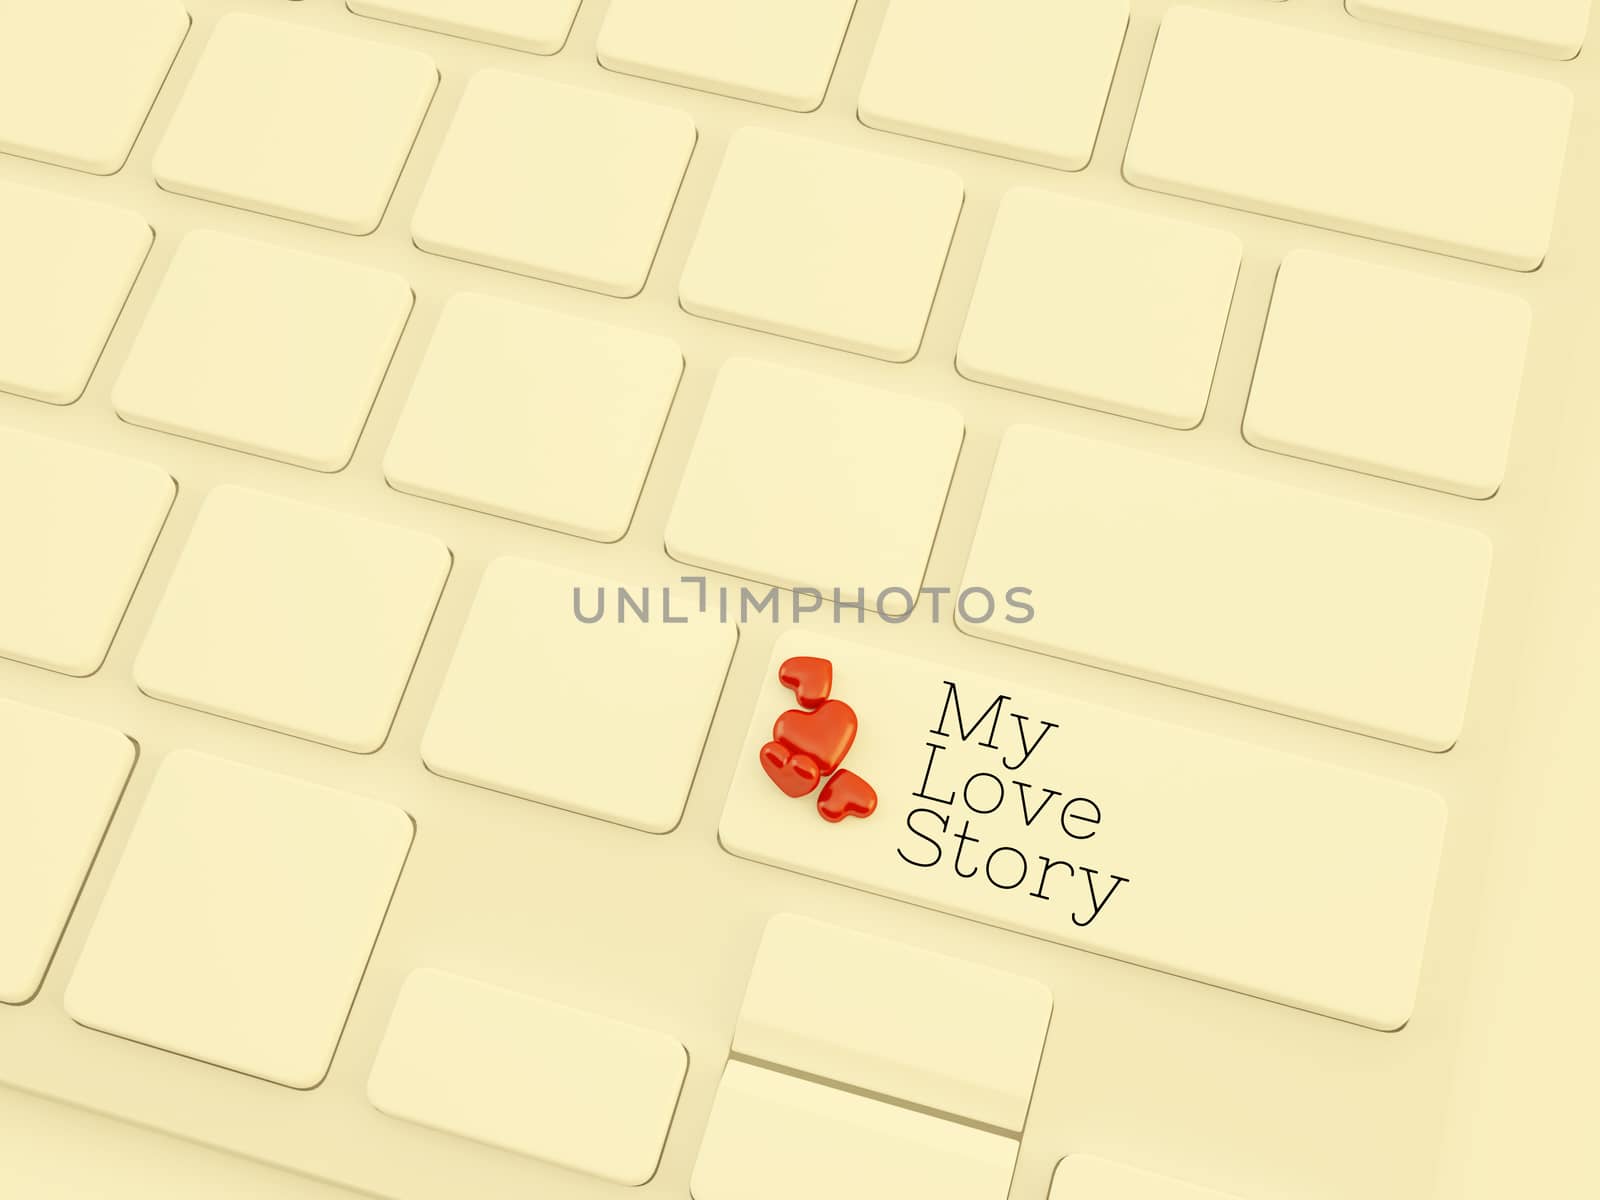 my love story key on keyboard with small heart shape object
